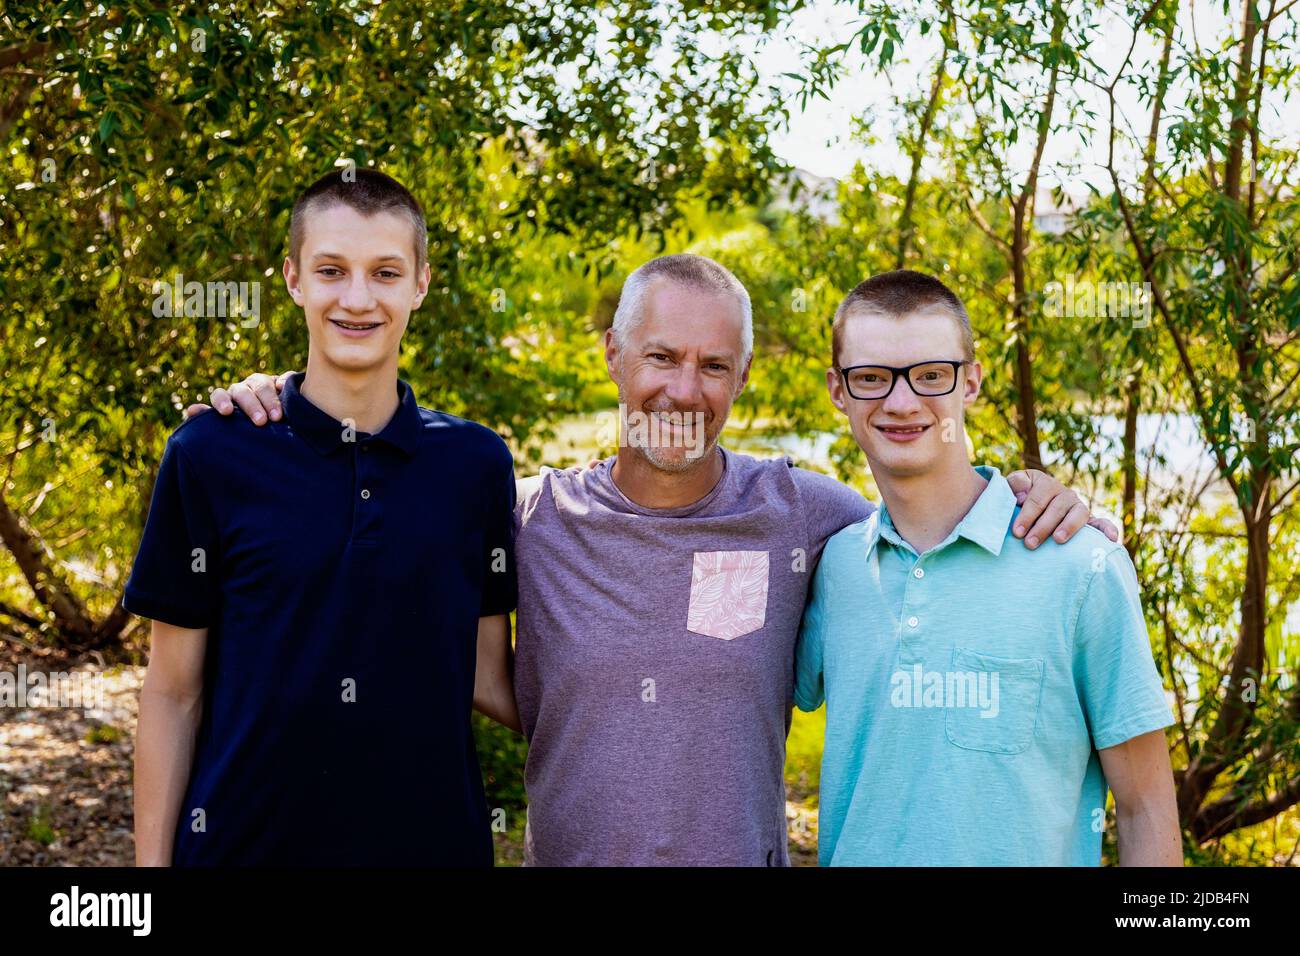 Outdoor portrait of a father with two sons; Edmonton, Alberta, Canada Stock Photo